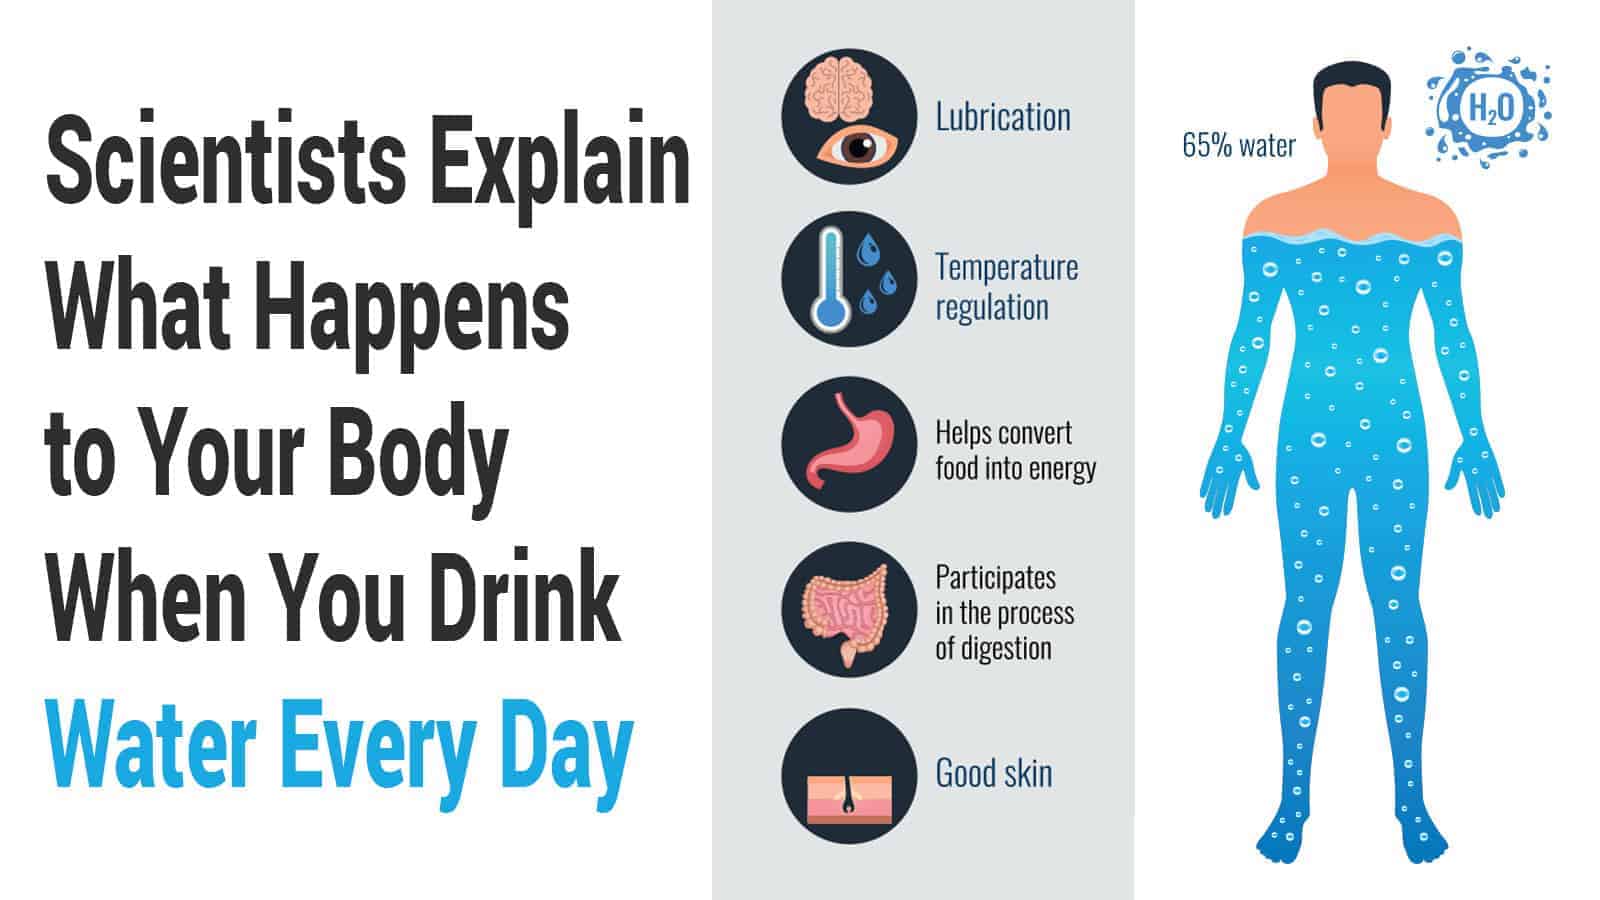 Scientists Explain What Happens to Your Body When You Drink Water Every Day